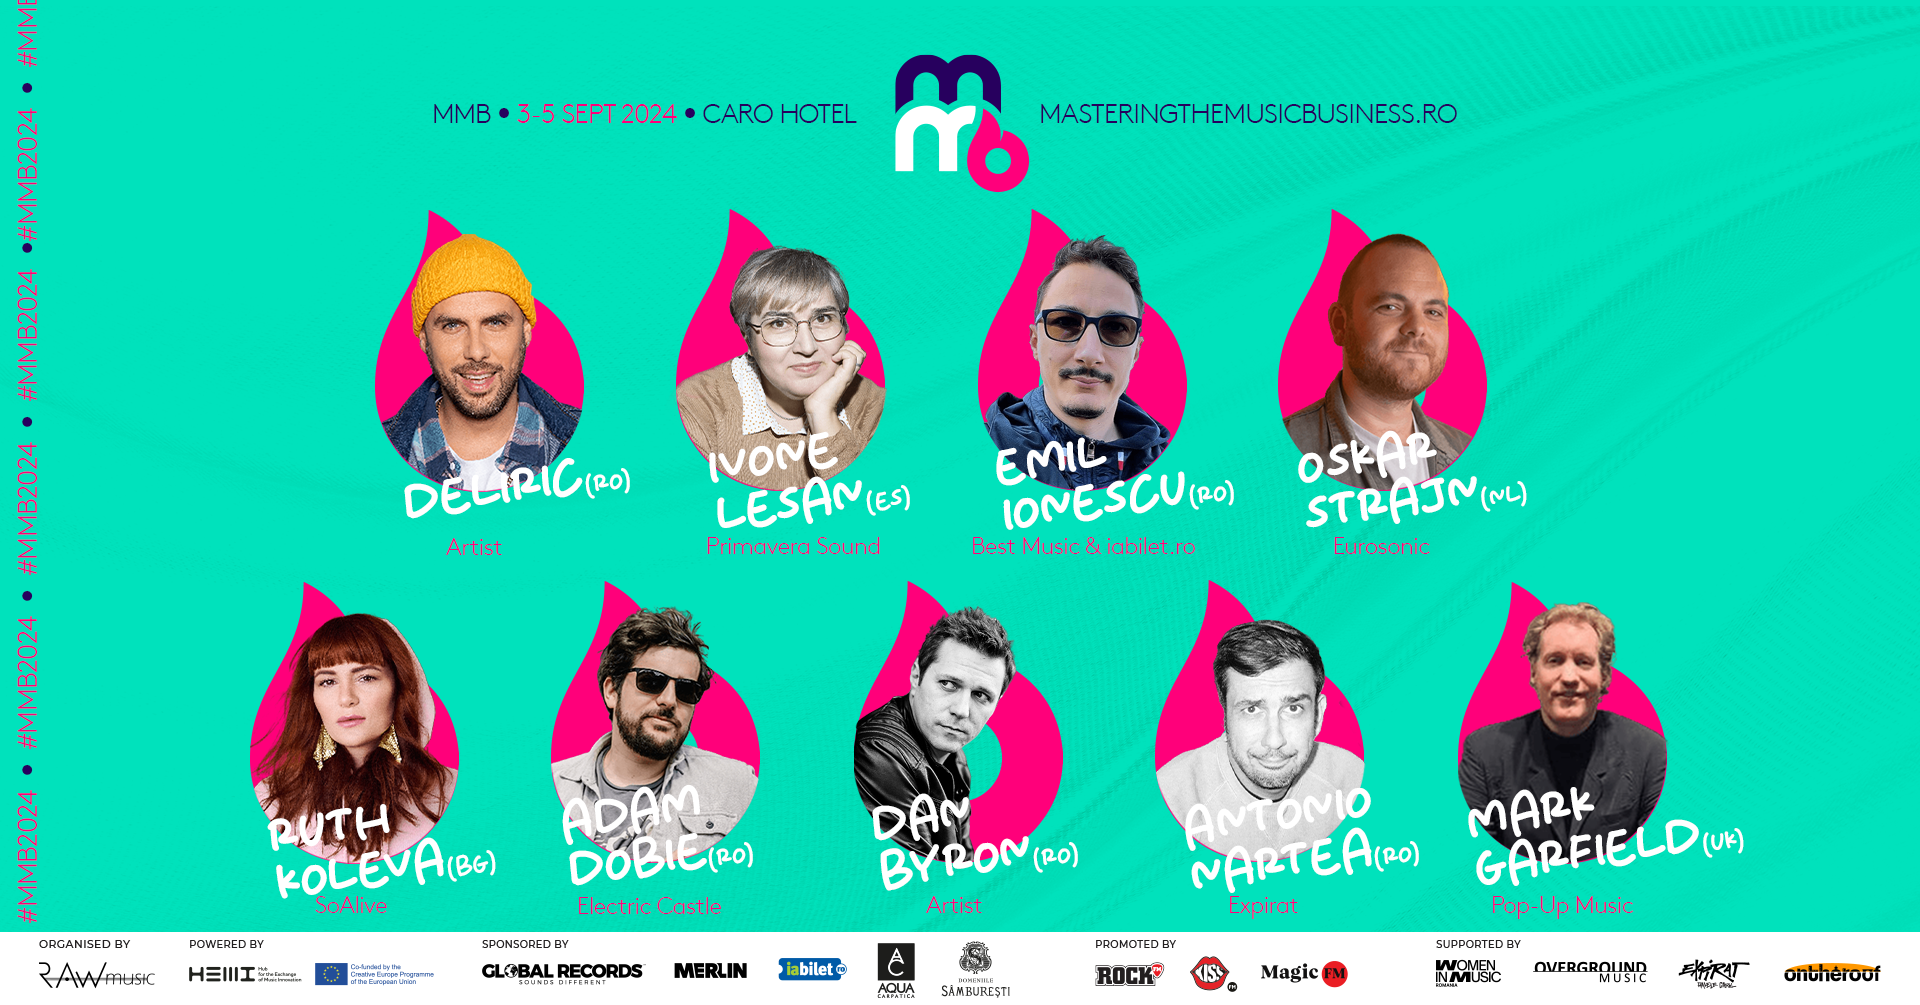 First speakers confirmed at Mastering the Music Business conference in Bucharest